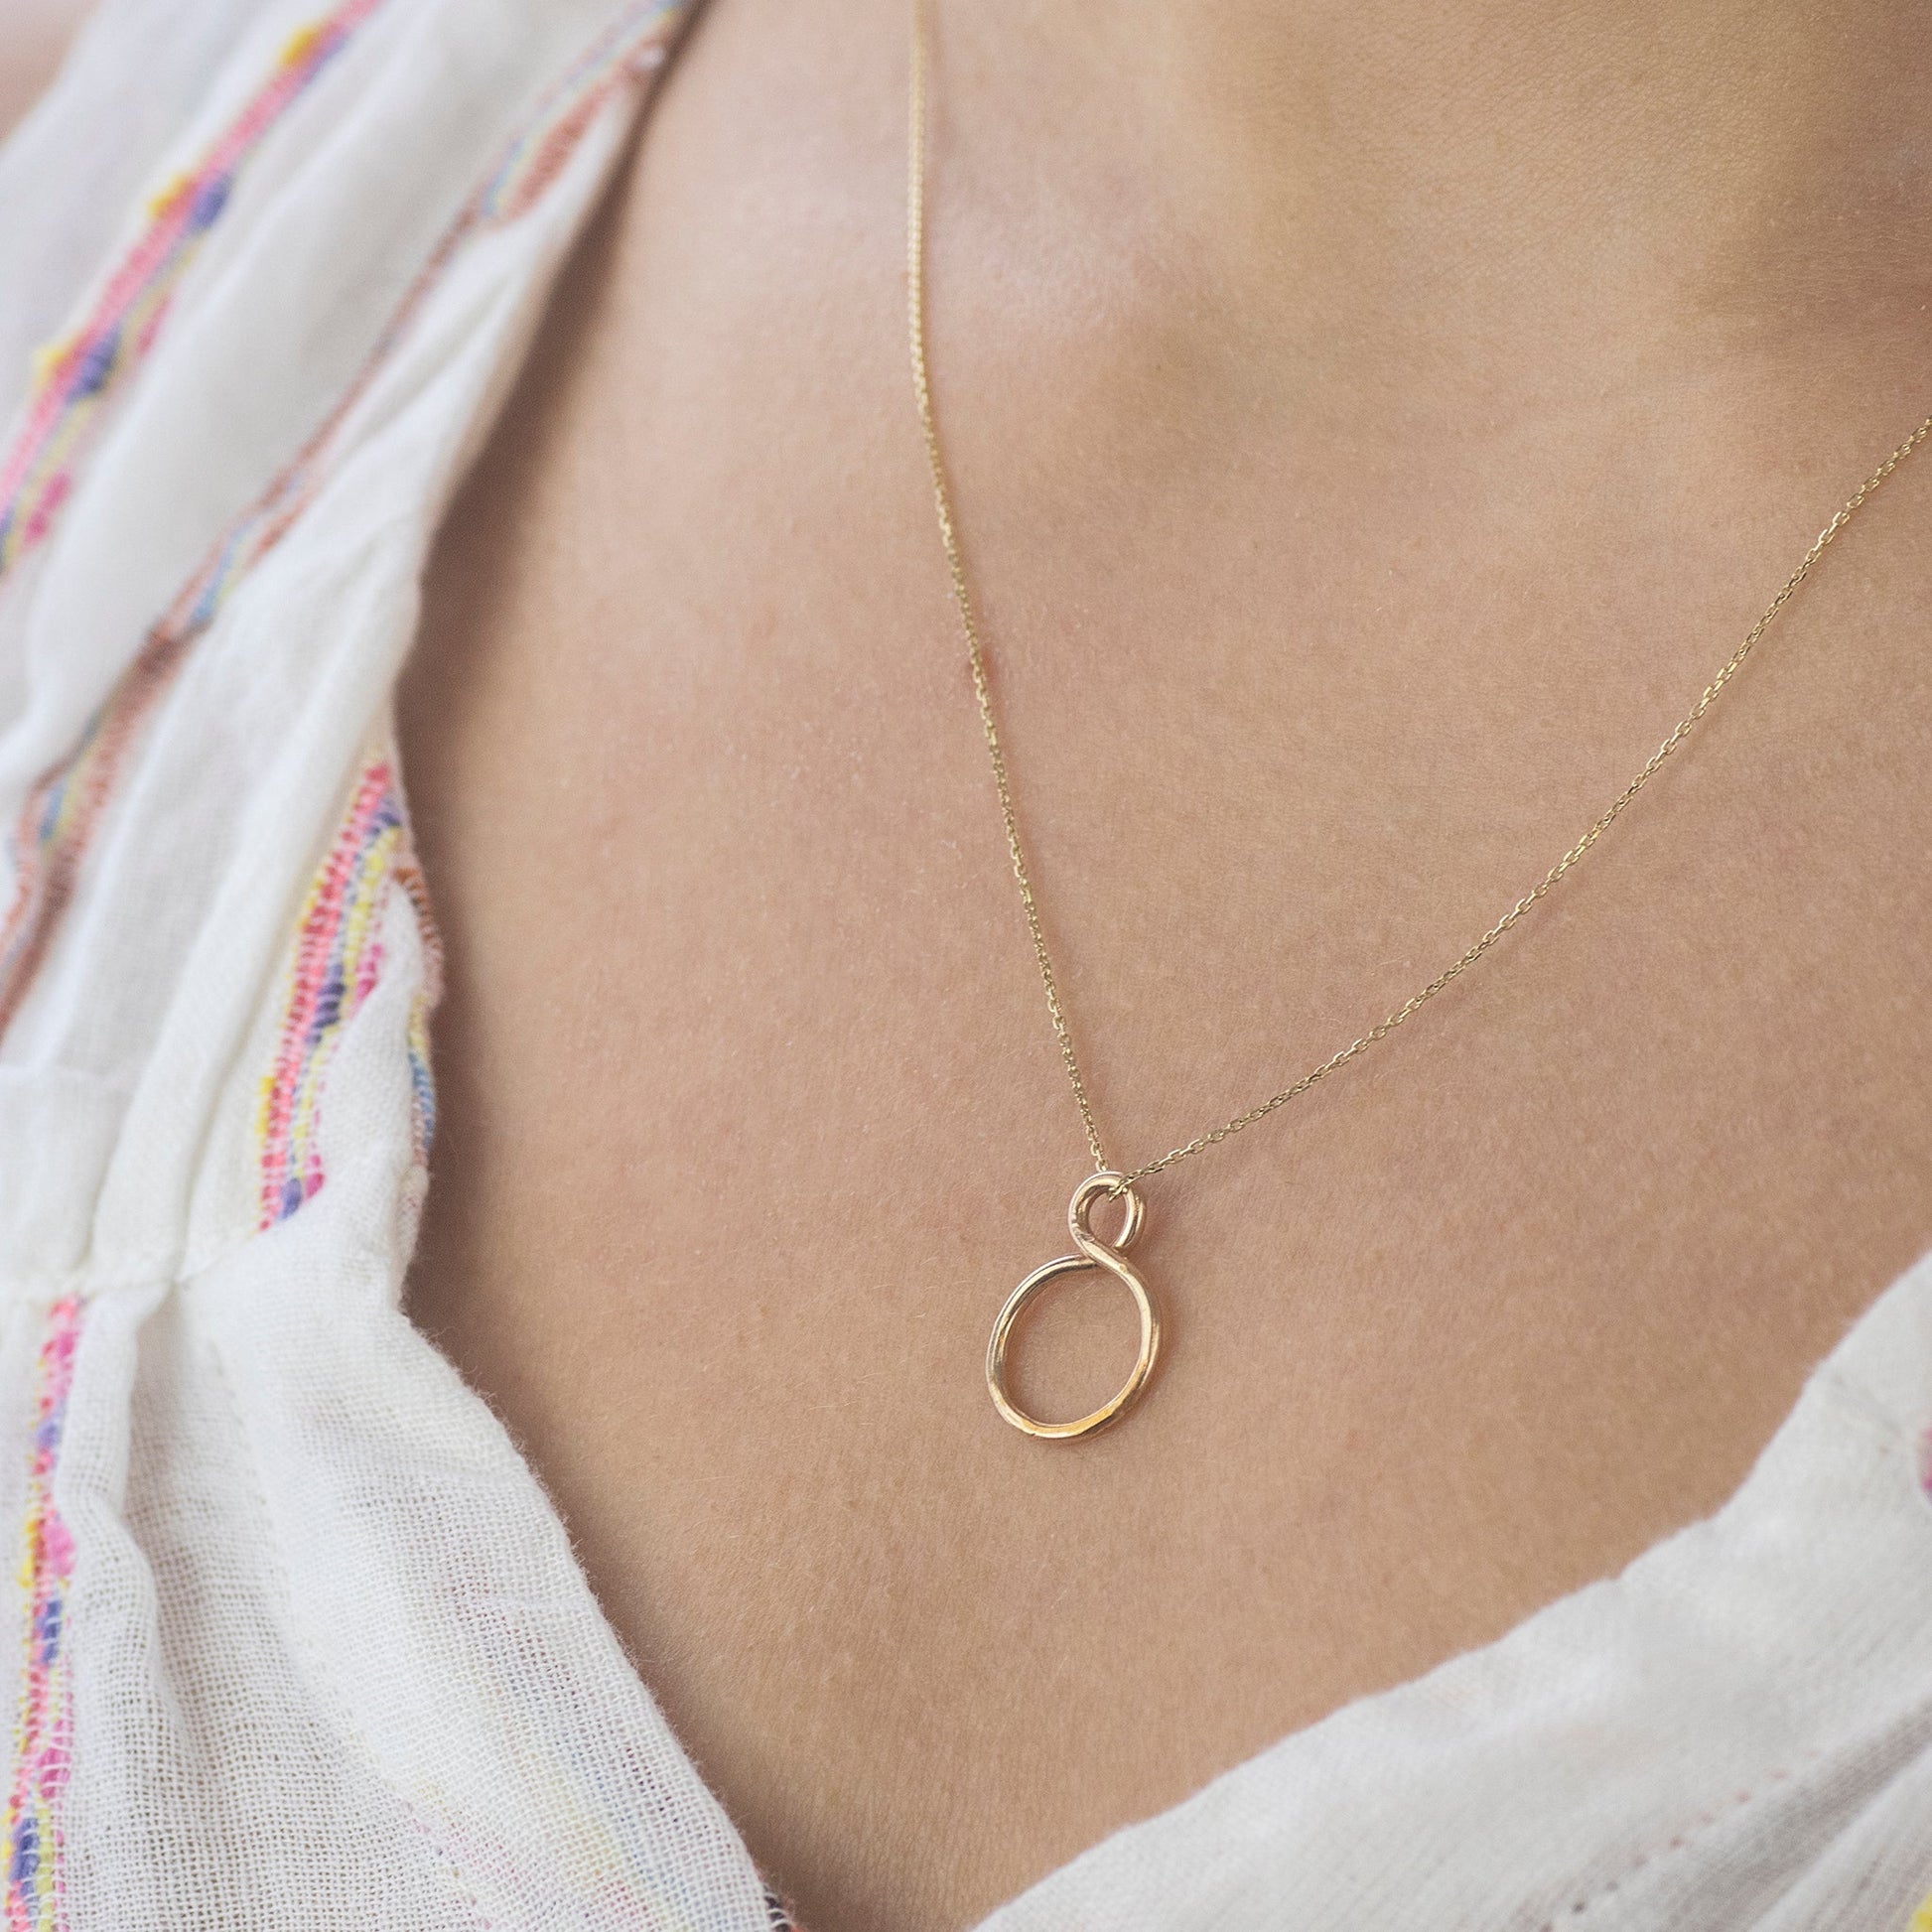 13th Birthday Gift - Petite Infinity Necklace - 9kt Gold